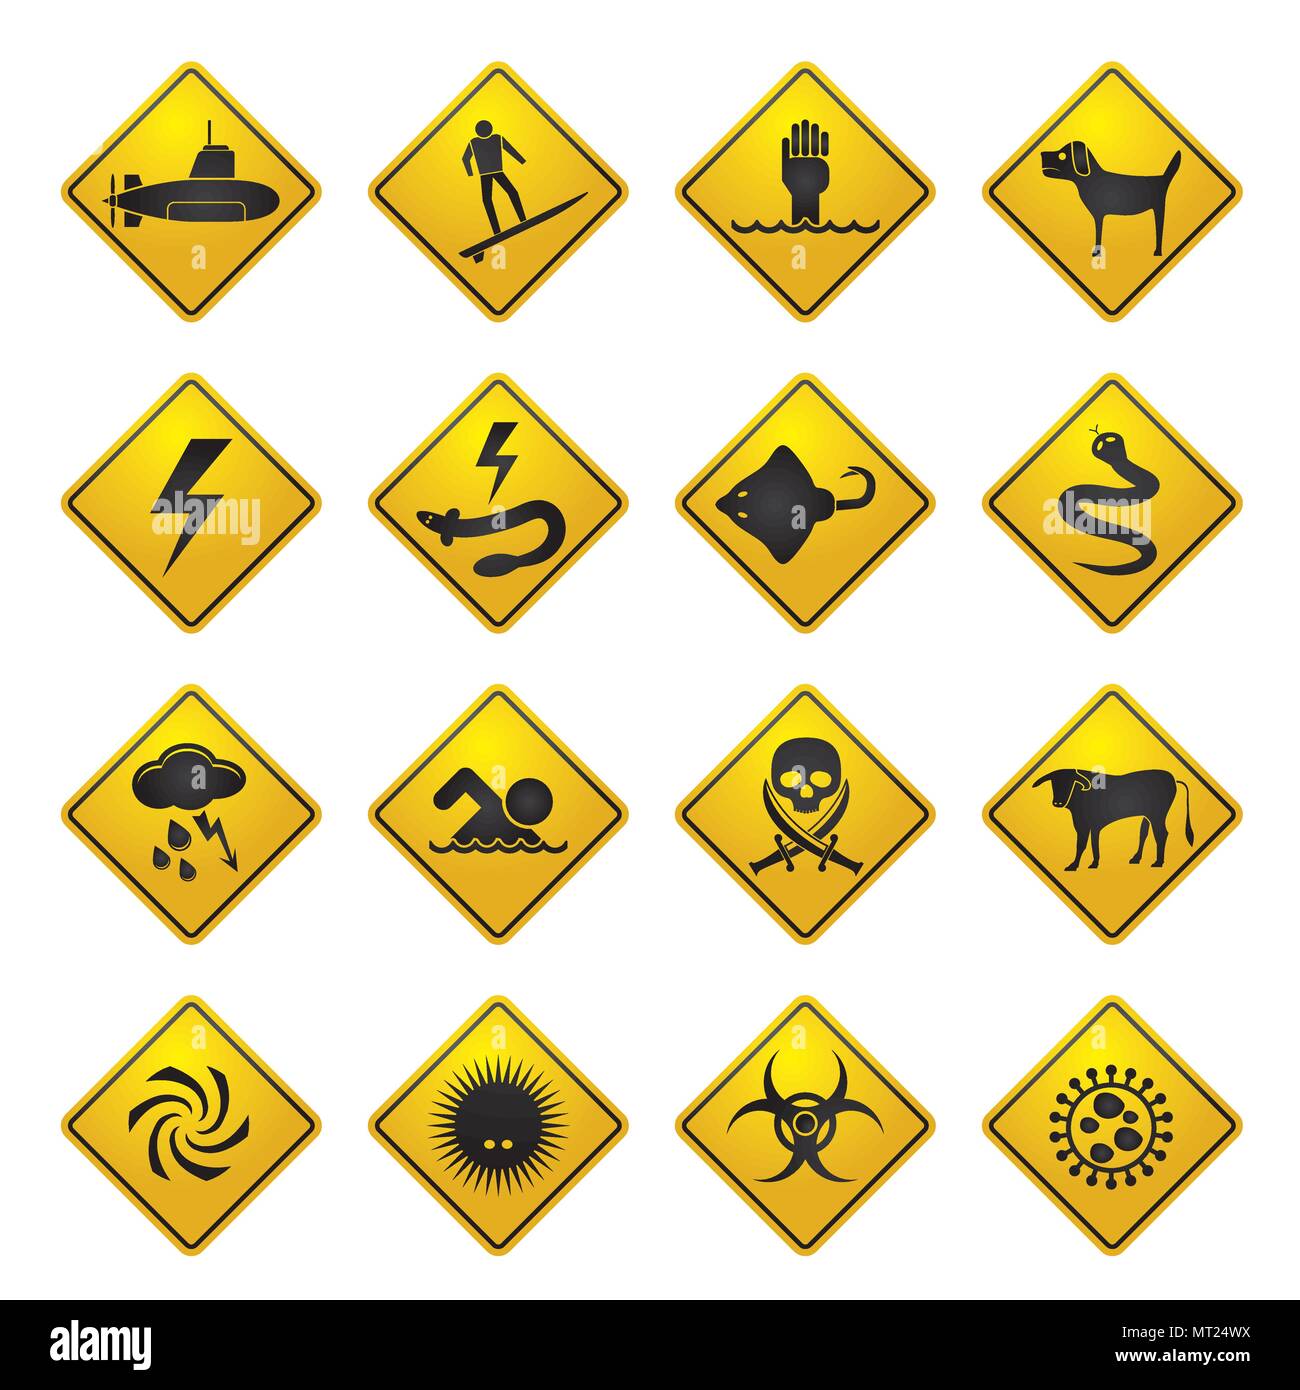 Warning Signs for dangers in sea, ocean, beach and rivers - vector icon set 2 Stock Vector